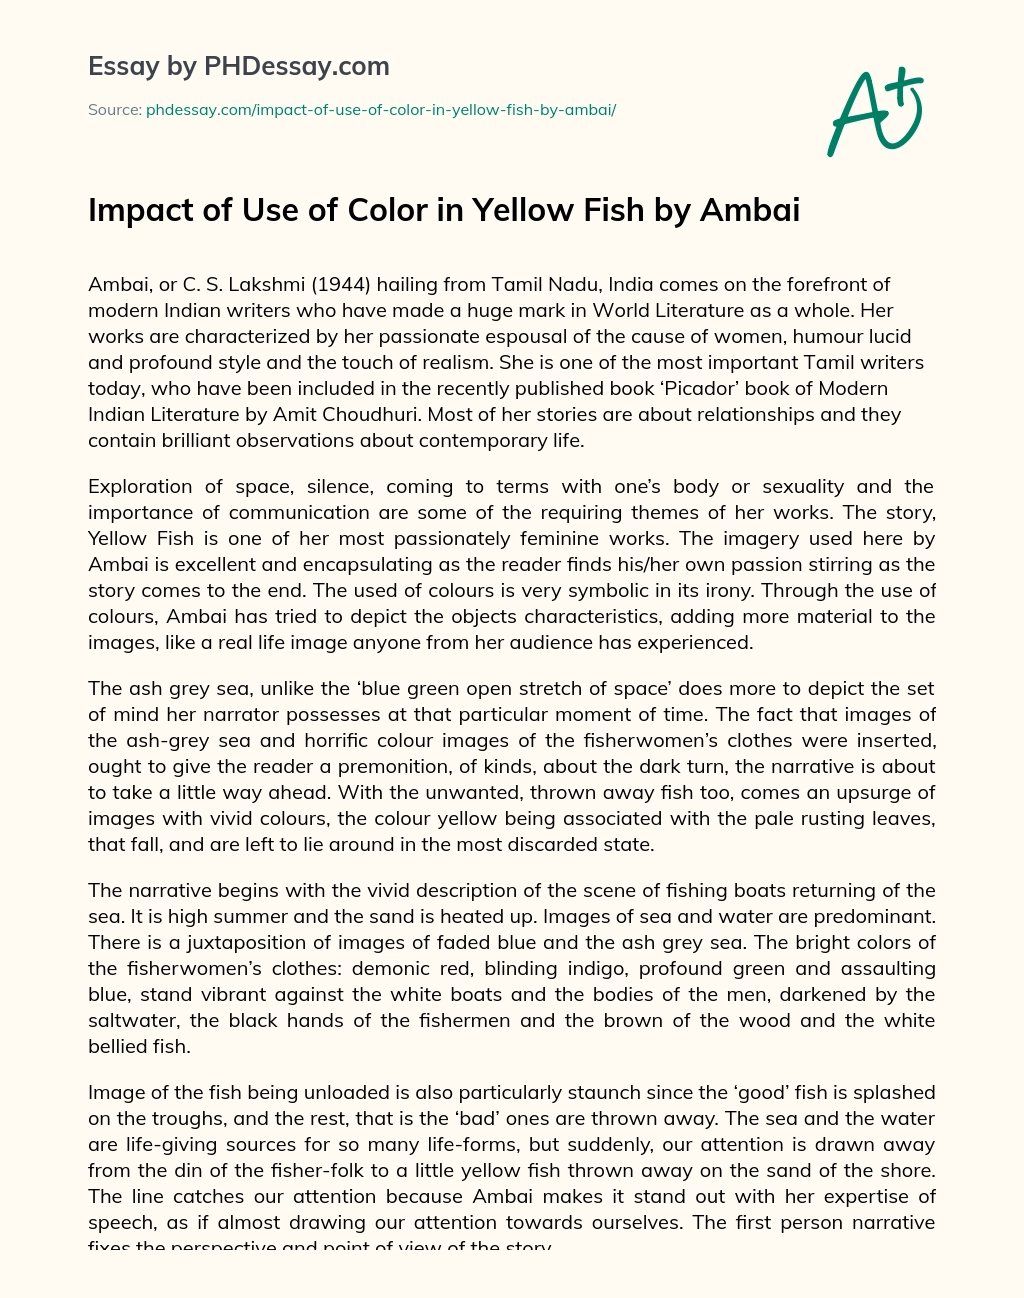 Impact of Use of Color in Yellow Fish by Ambai essay